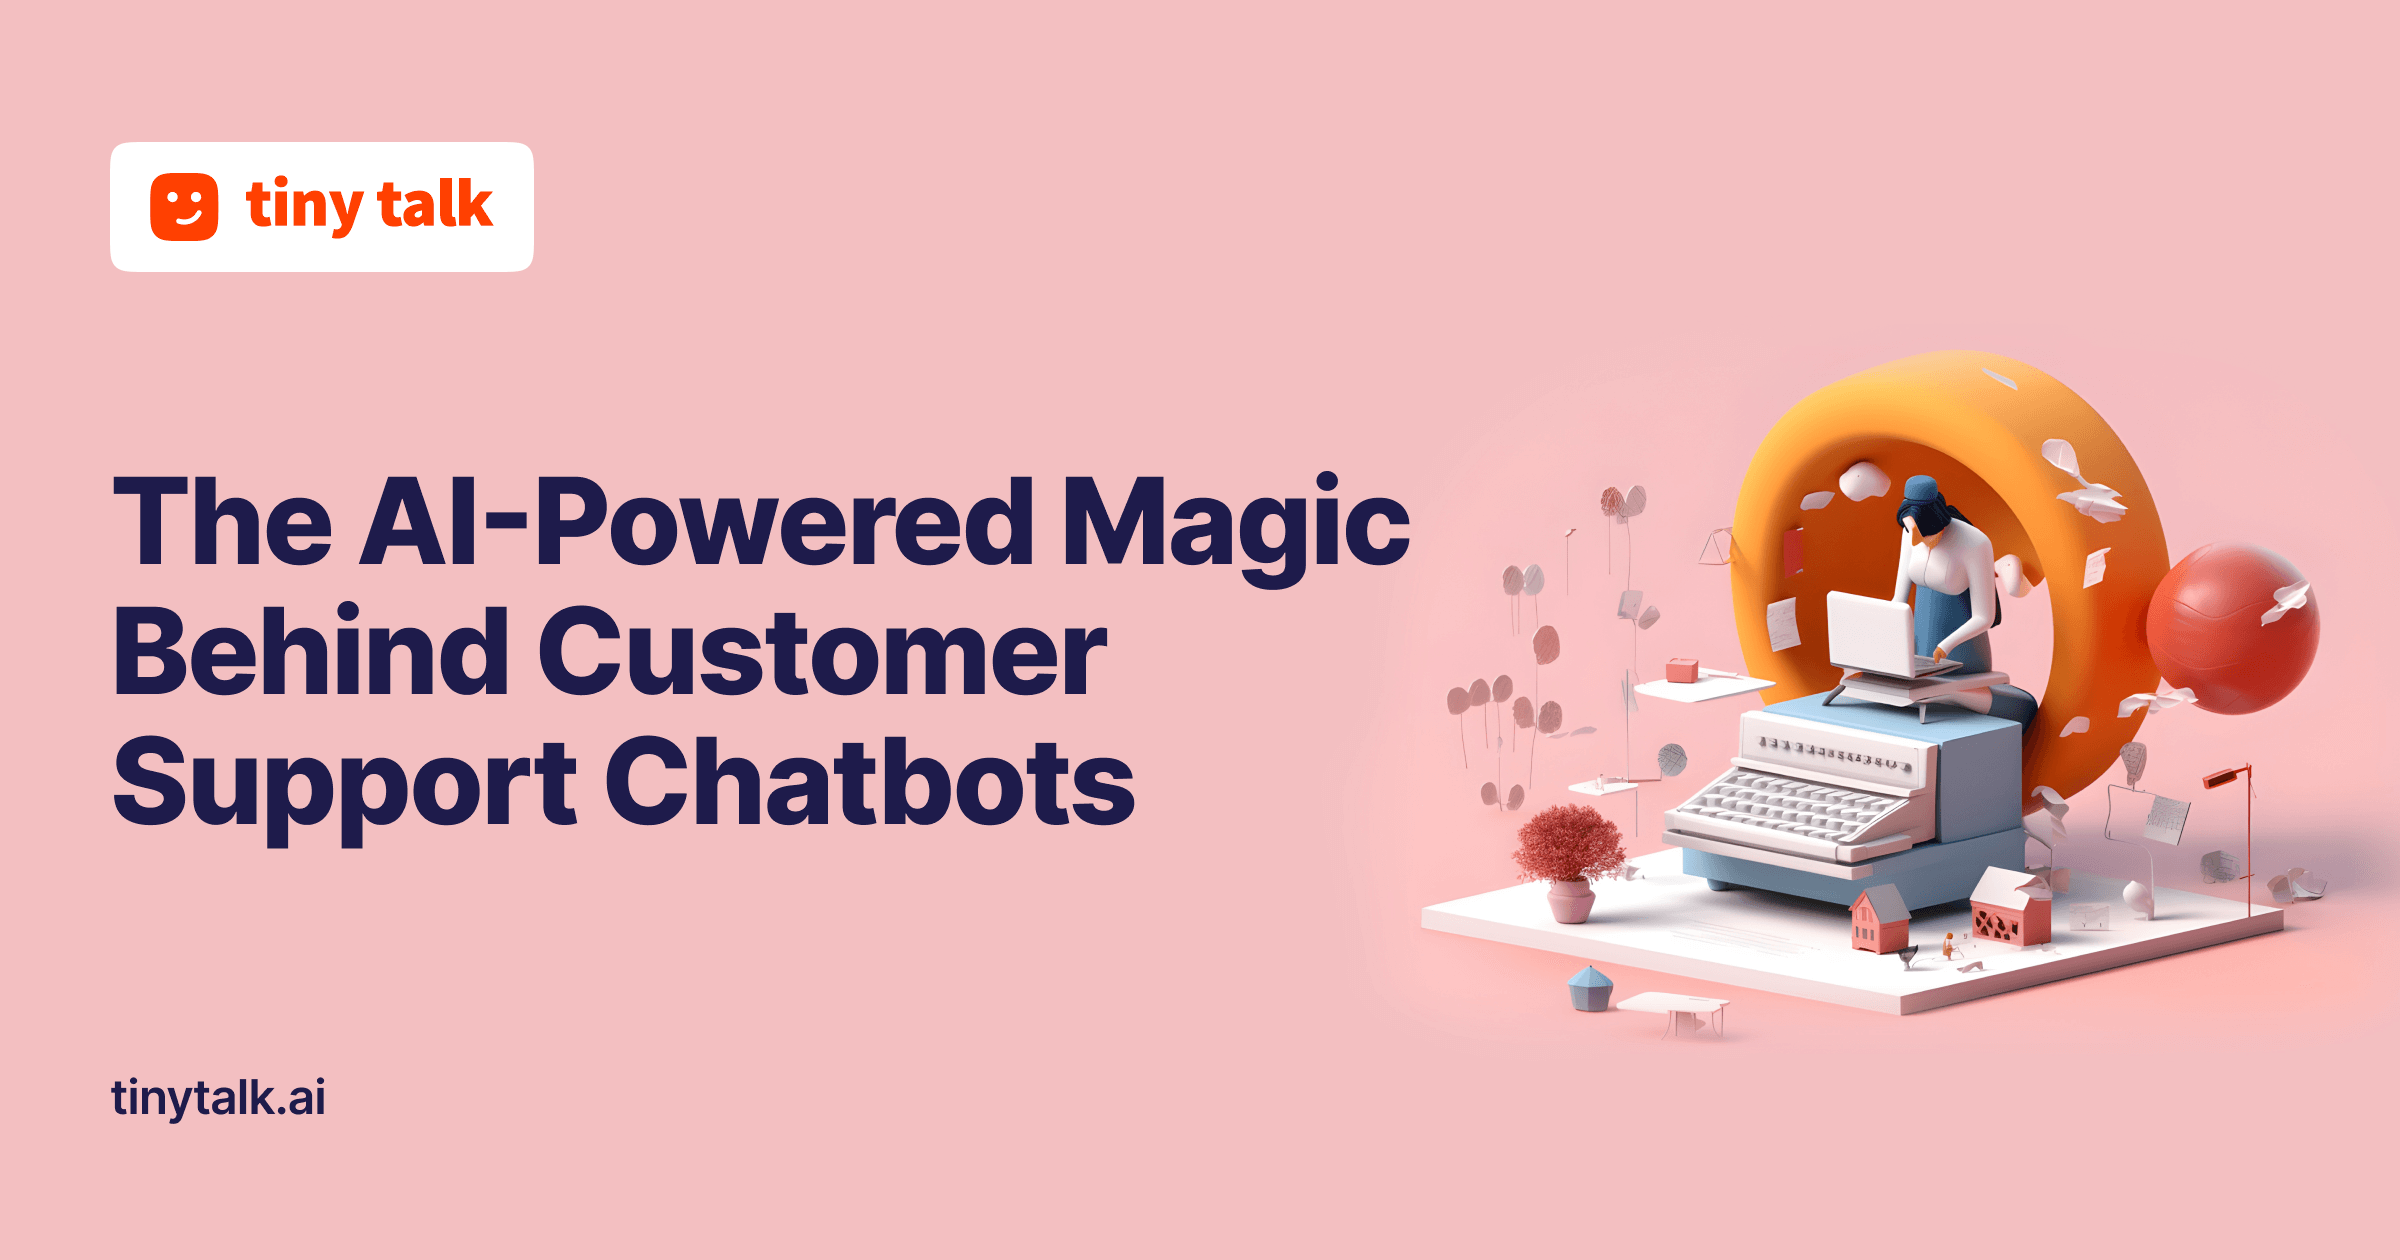 The AI-Powered Magic Behind Customer Support Chatbots